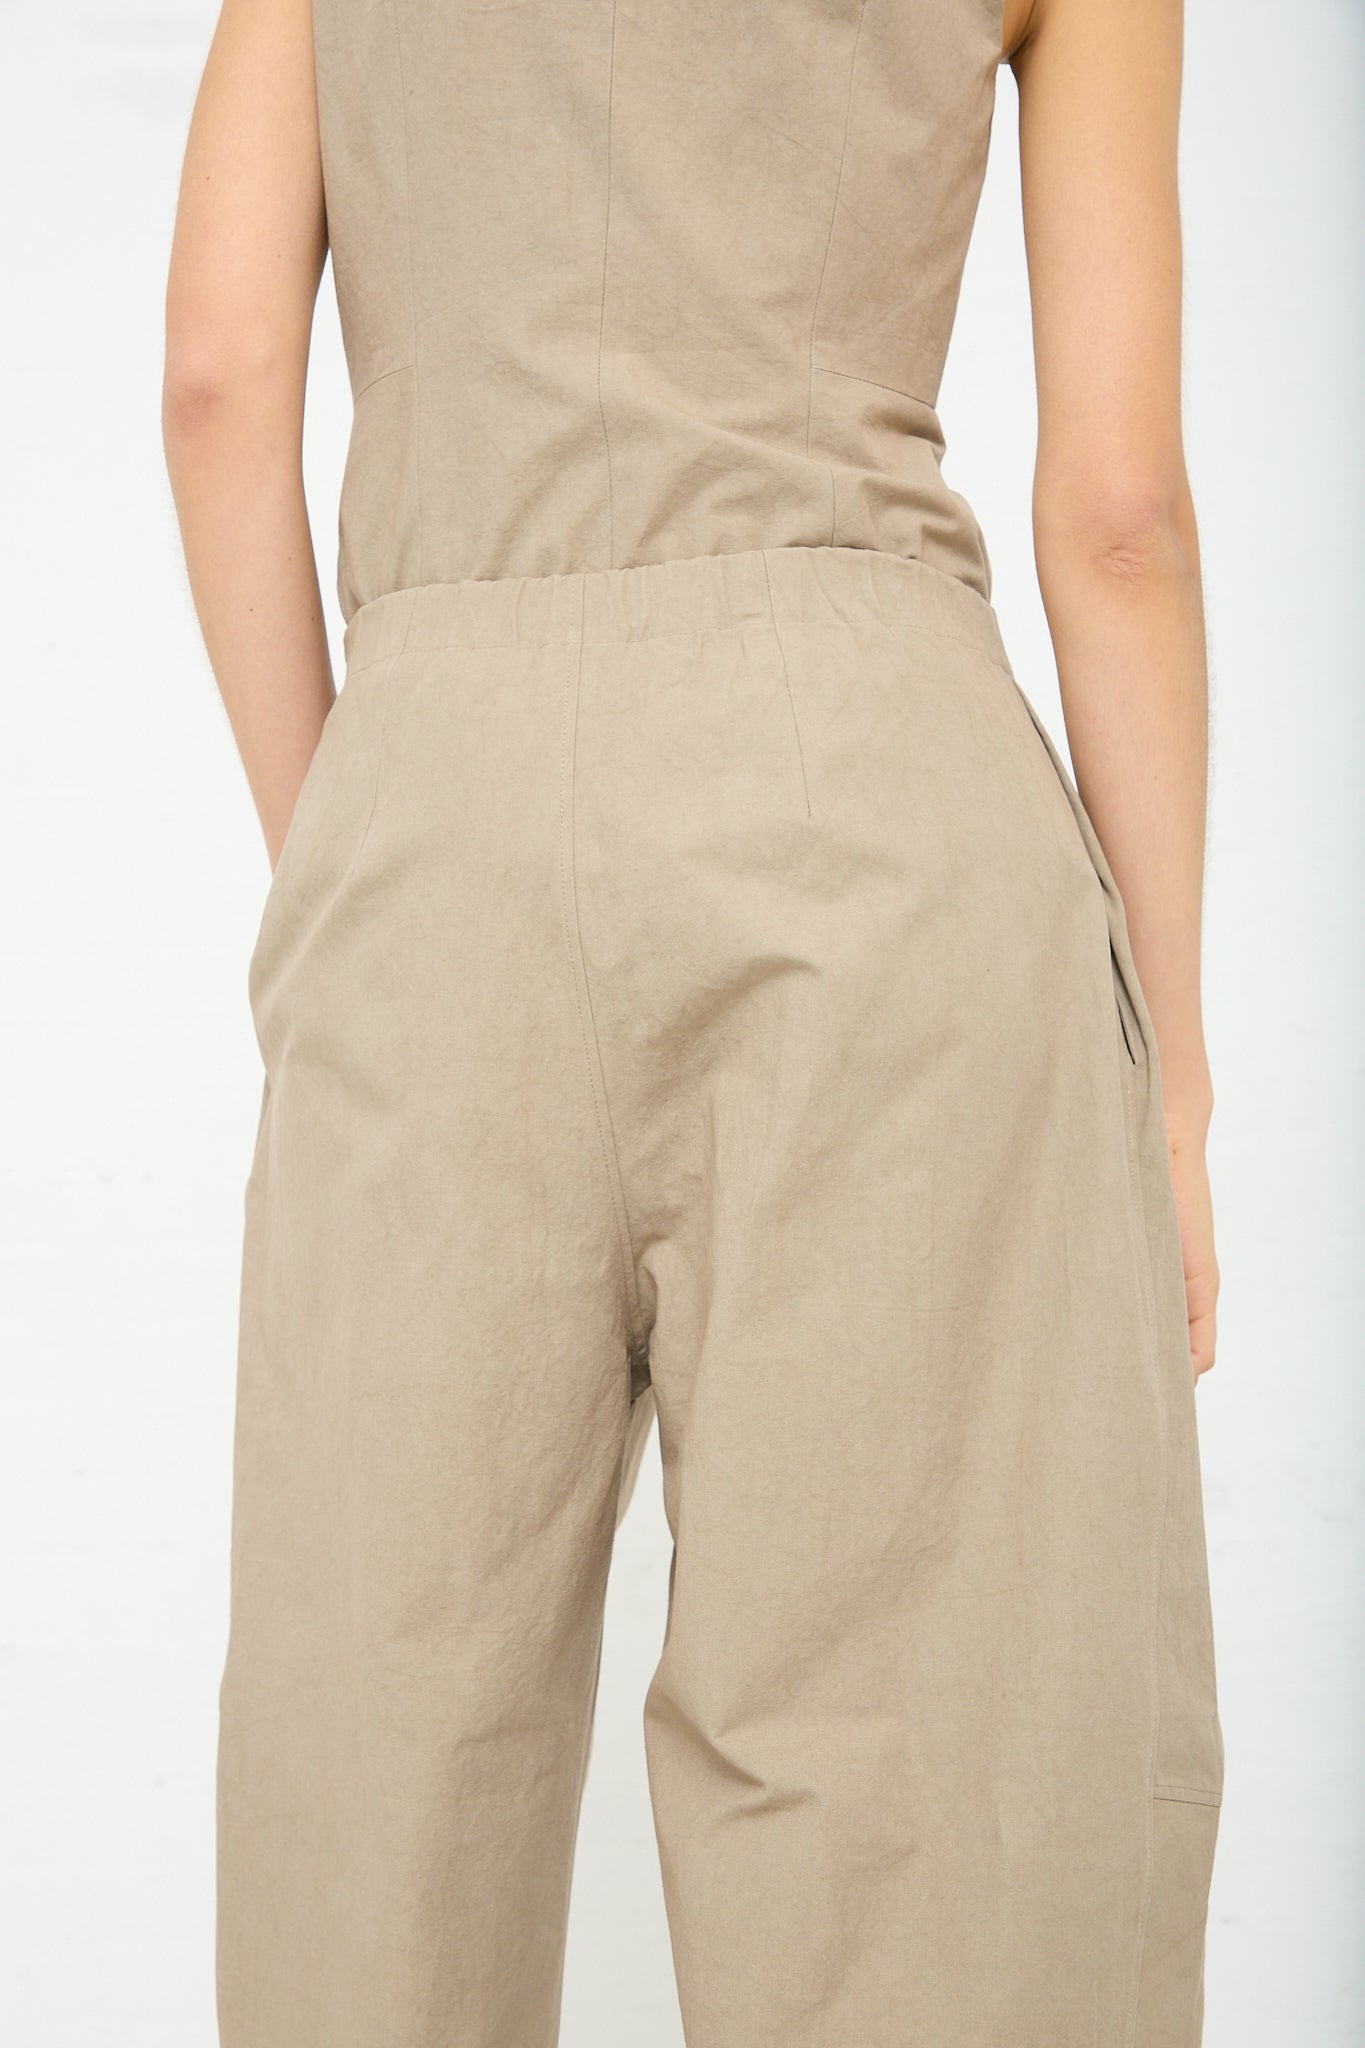 The back view of a woman wearing the Lauren Manoogian New Structure Pant in Drab, a relaxed fit, cotton jumpsuit with an elasticated waist. The model is wearing a matching top. Up close view.